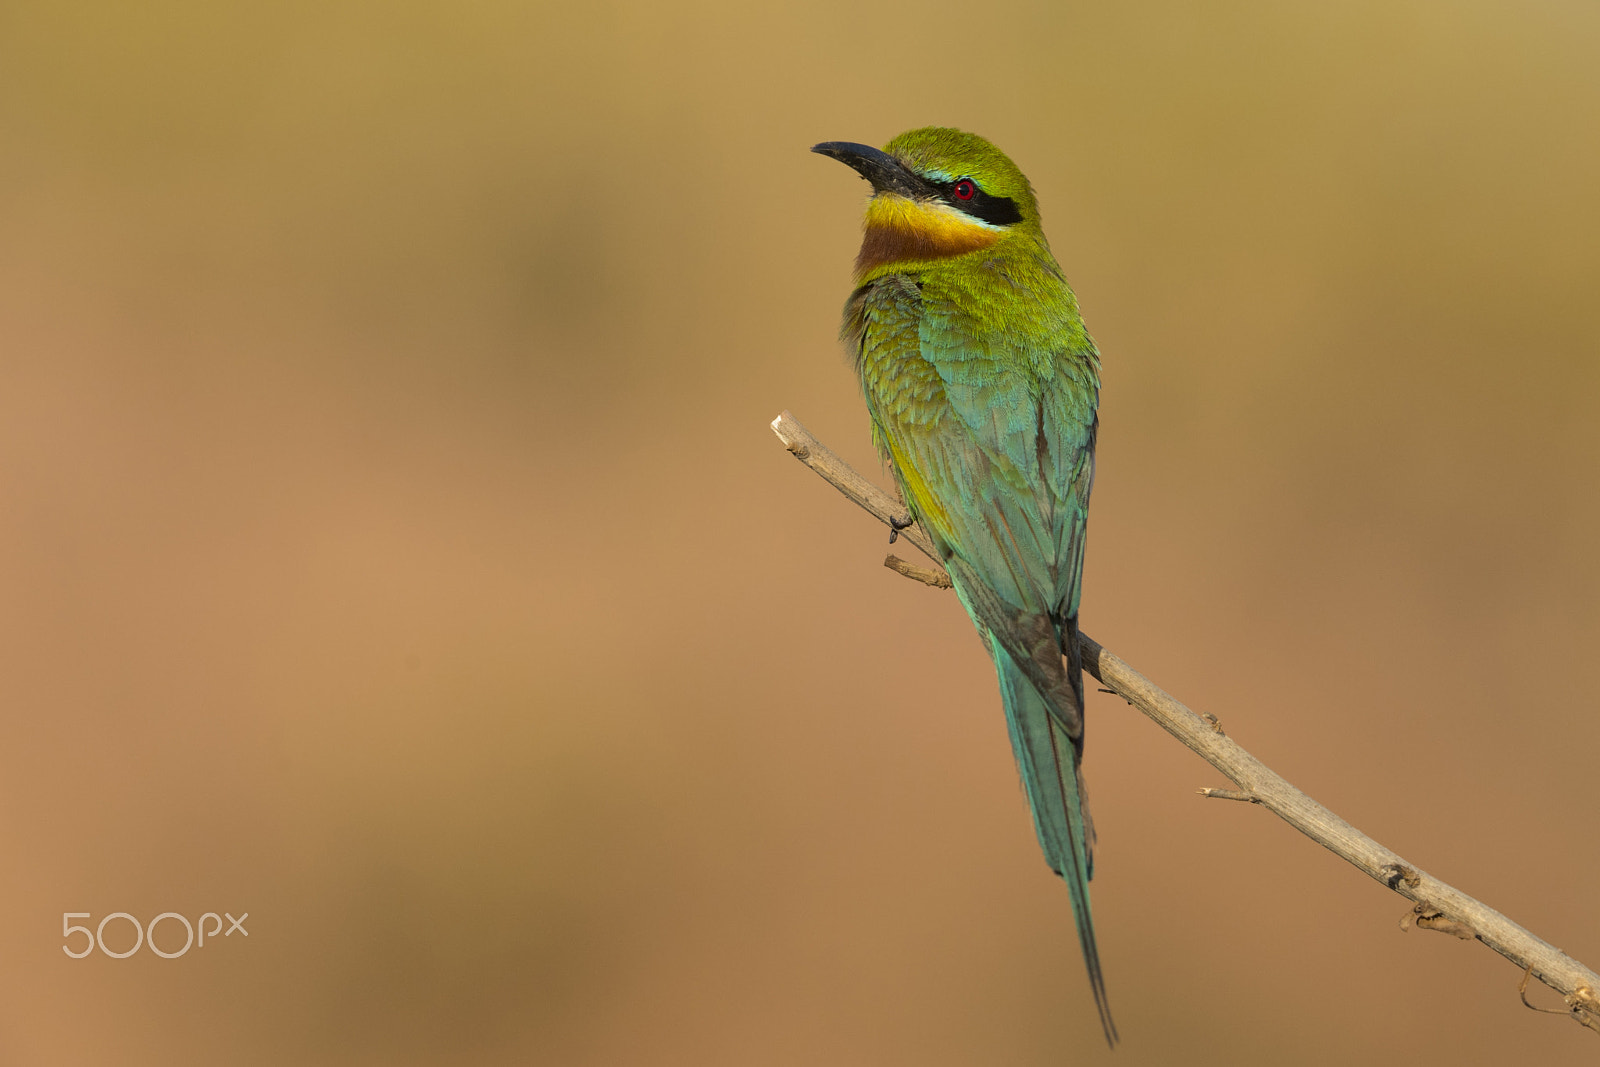 Nikon D5 sample photo. Wonders of nature: blue-tailed bee-eater photography